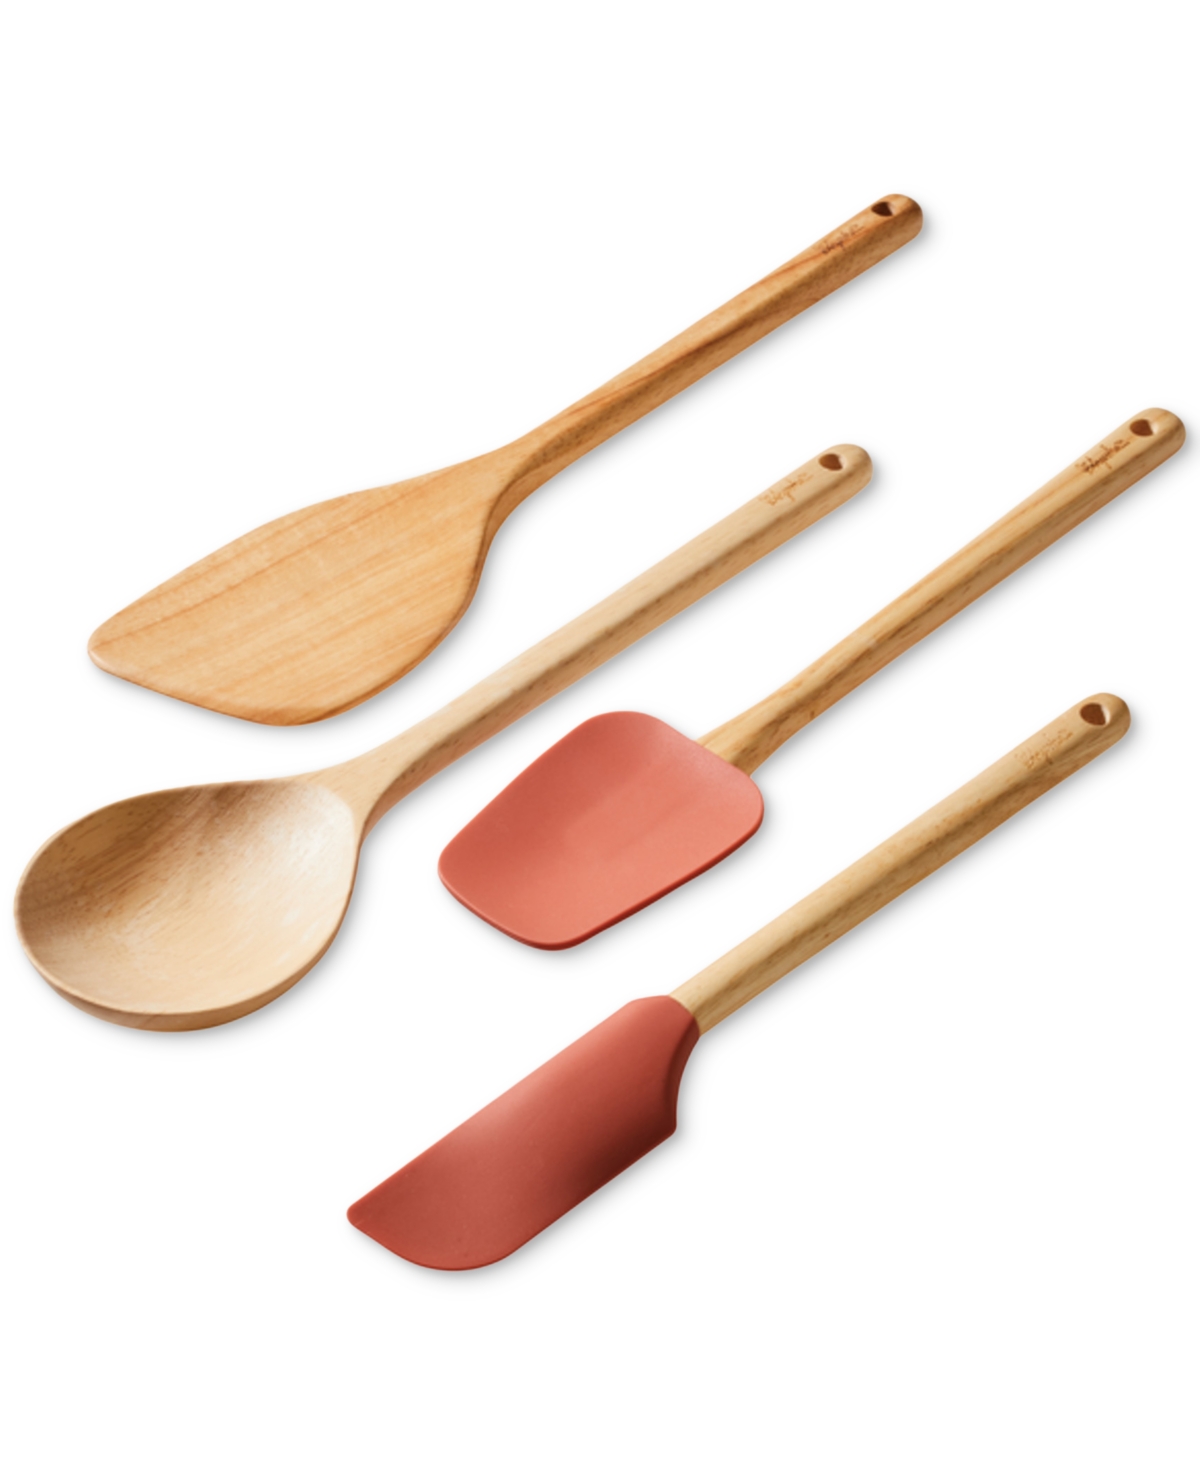 Ayesha Curry Tools and Gadgets 4-Pc. Cooking Utensil Set